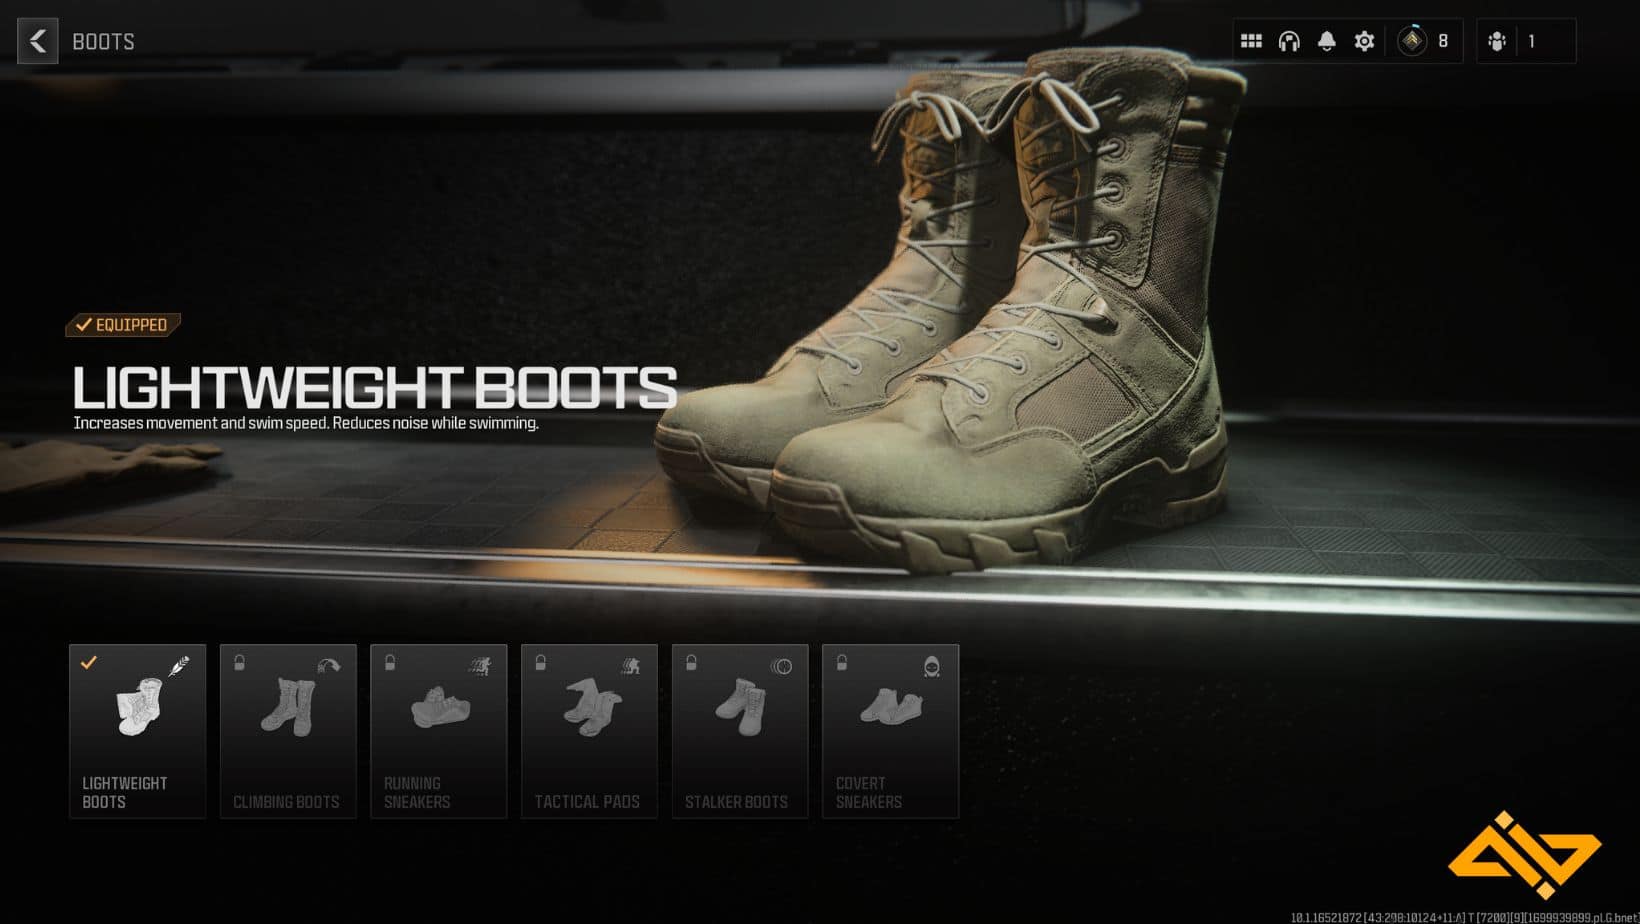 As the name suggests, these boots are lightweight and allow you to quickly move around the map.